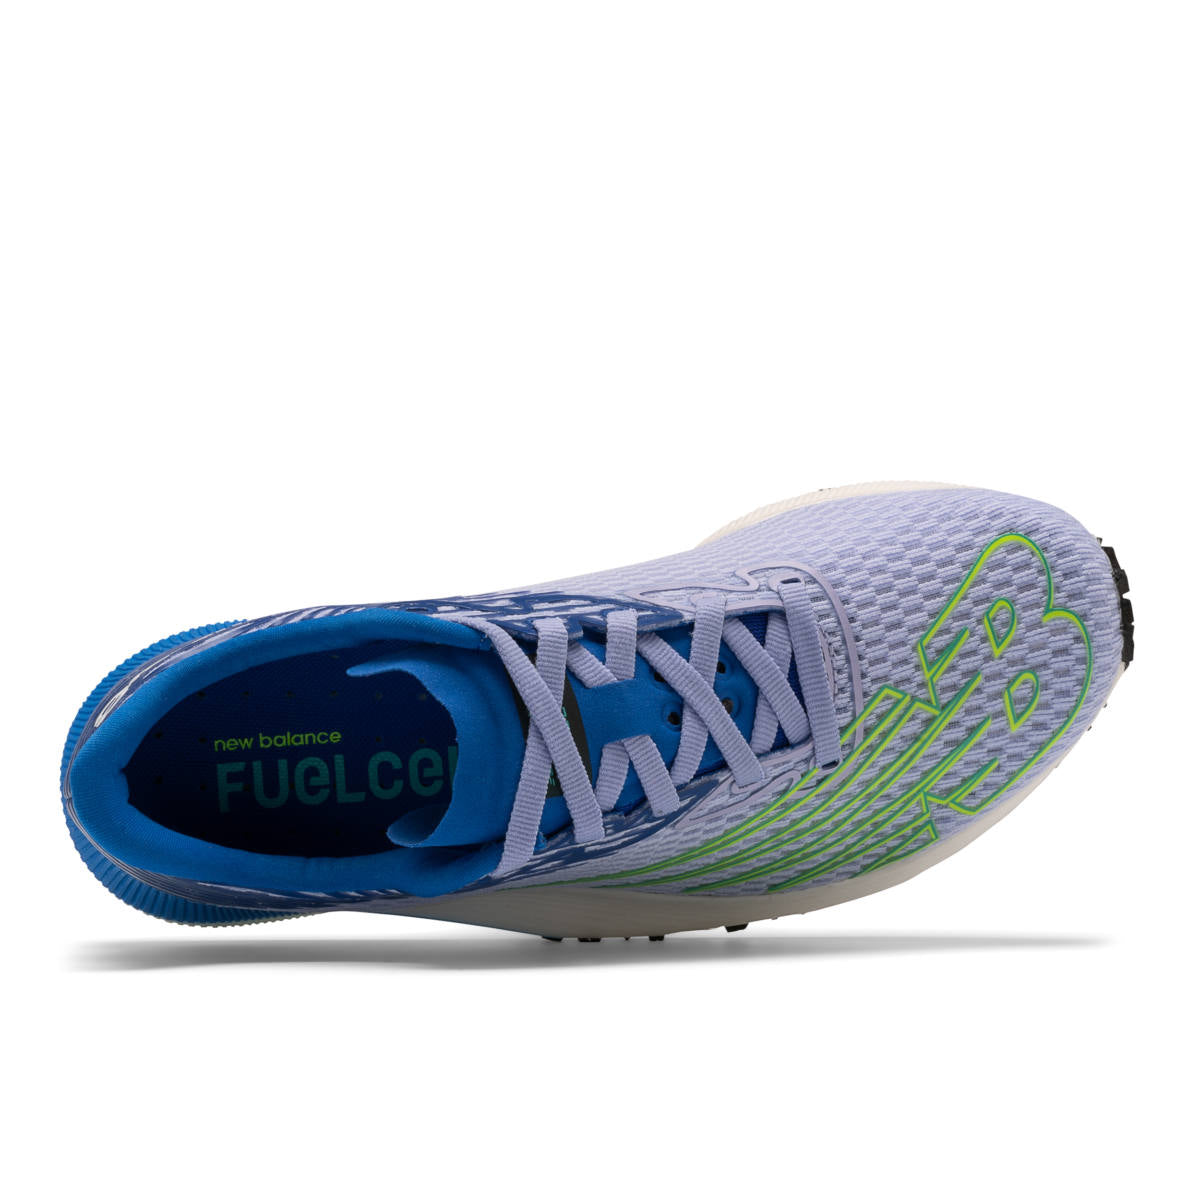 Women's New Balance FuelCell RC Elite WRCELYB